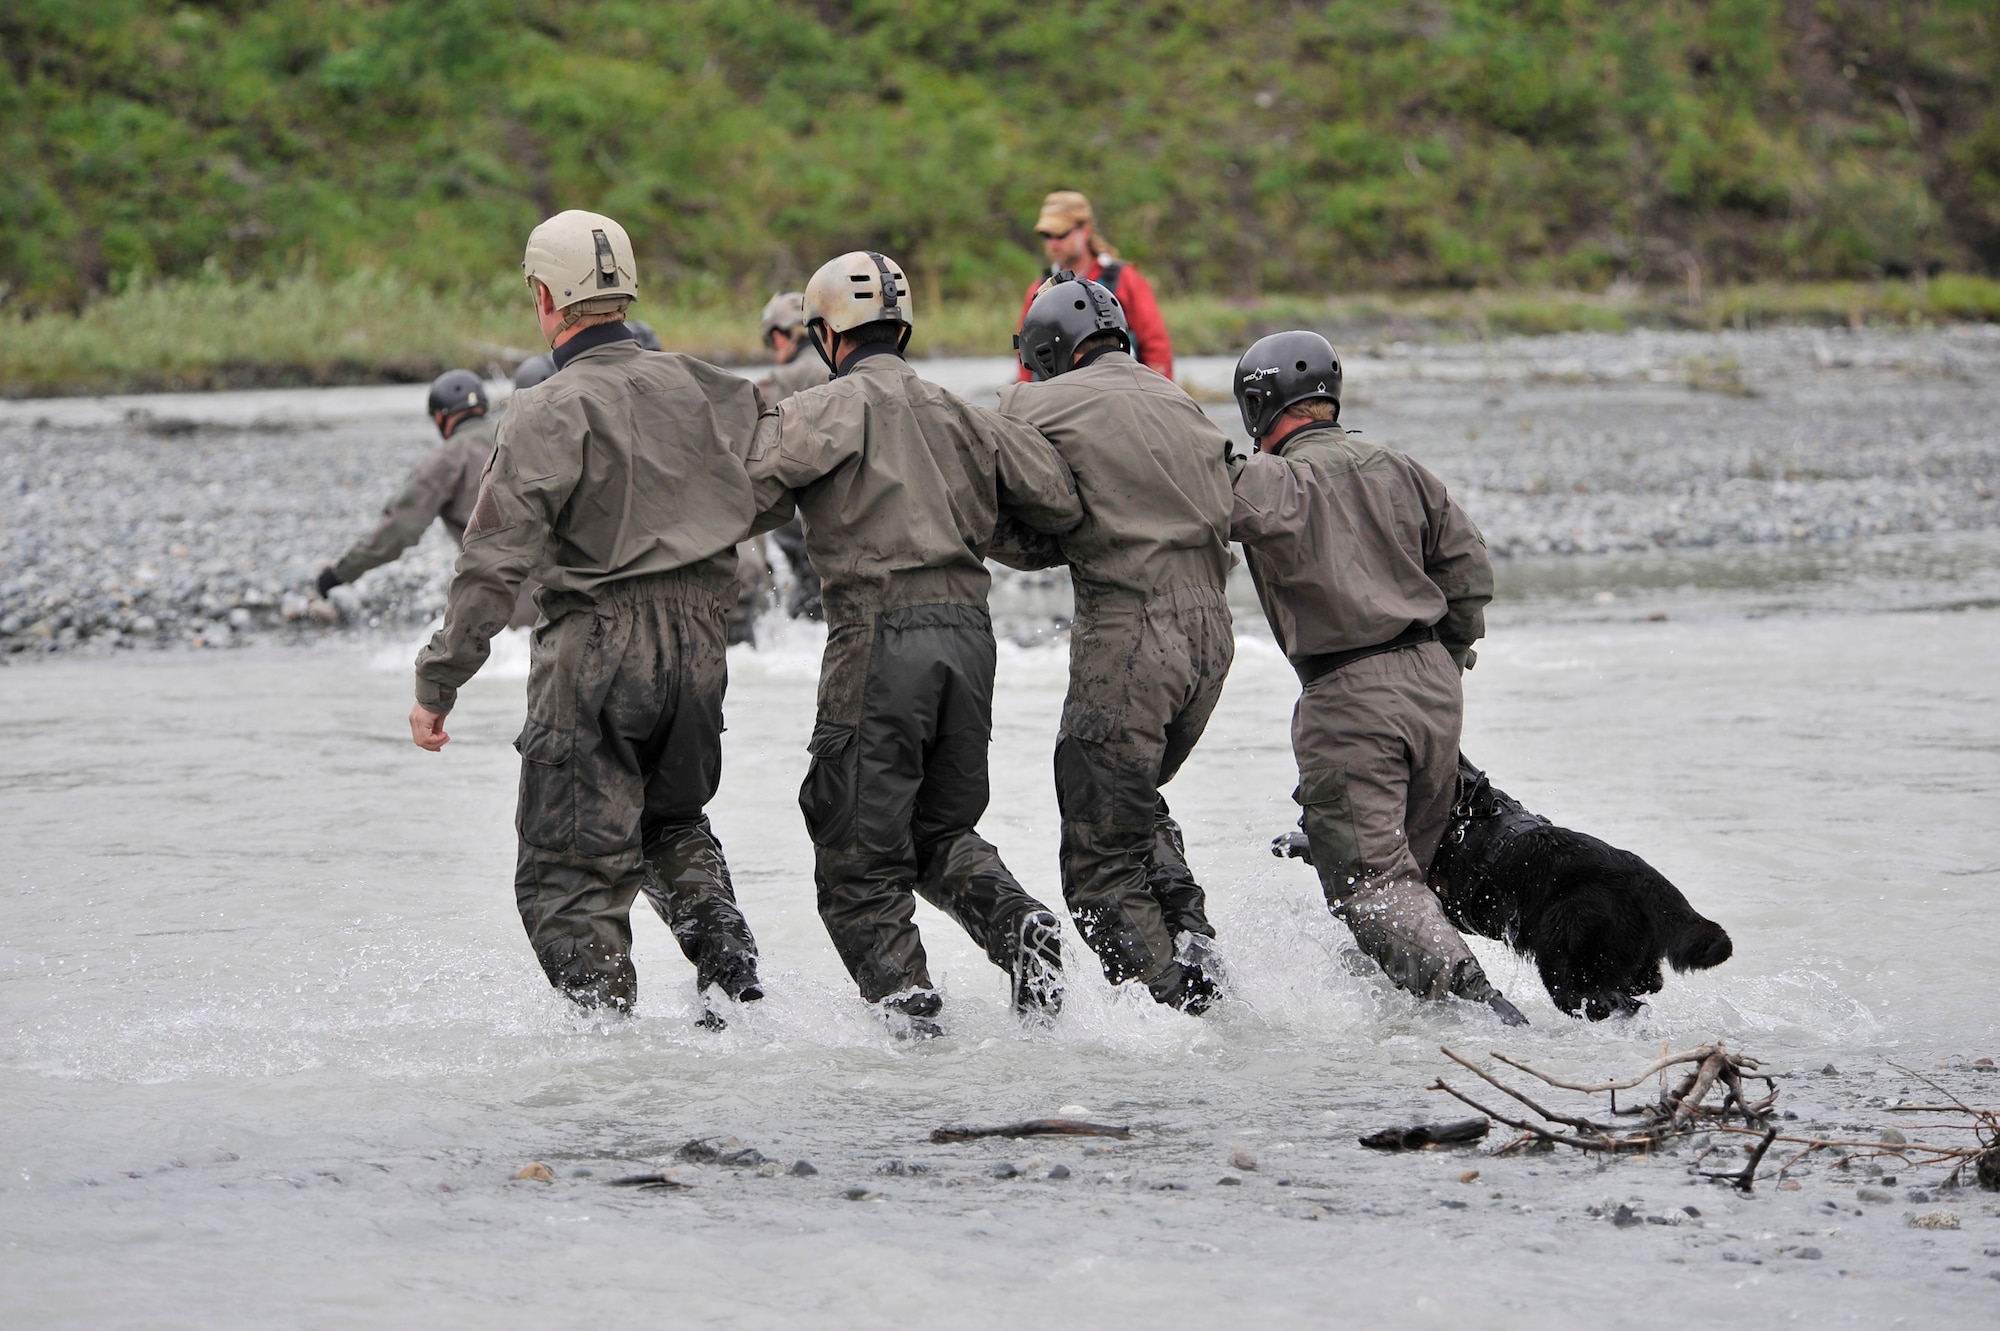 FORT WAINWRIGHT, Alaska -- A team of Navy SEALs conducts a river crossing exercise at Phelan Creek during NORTHER EDGE 2009, June 17. NE09 is a large scale exercise hosted in Alaska to improve command, control and communications between the Armed Services. The west coast based SEAL's are training for overseas operations. (U.S. Air Force photo/Staff Sgt. Christopher Boitz)